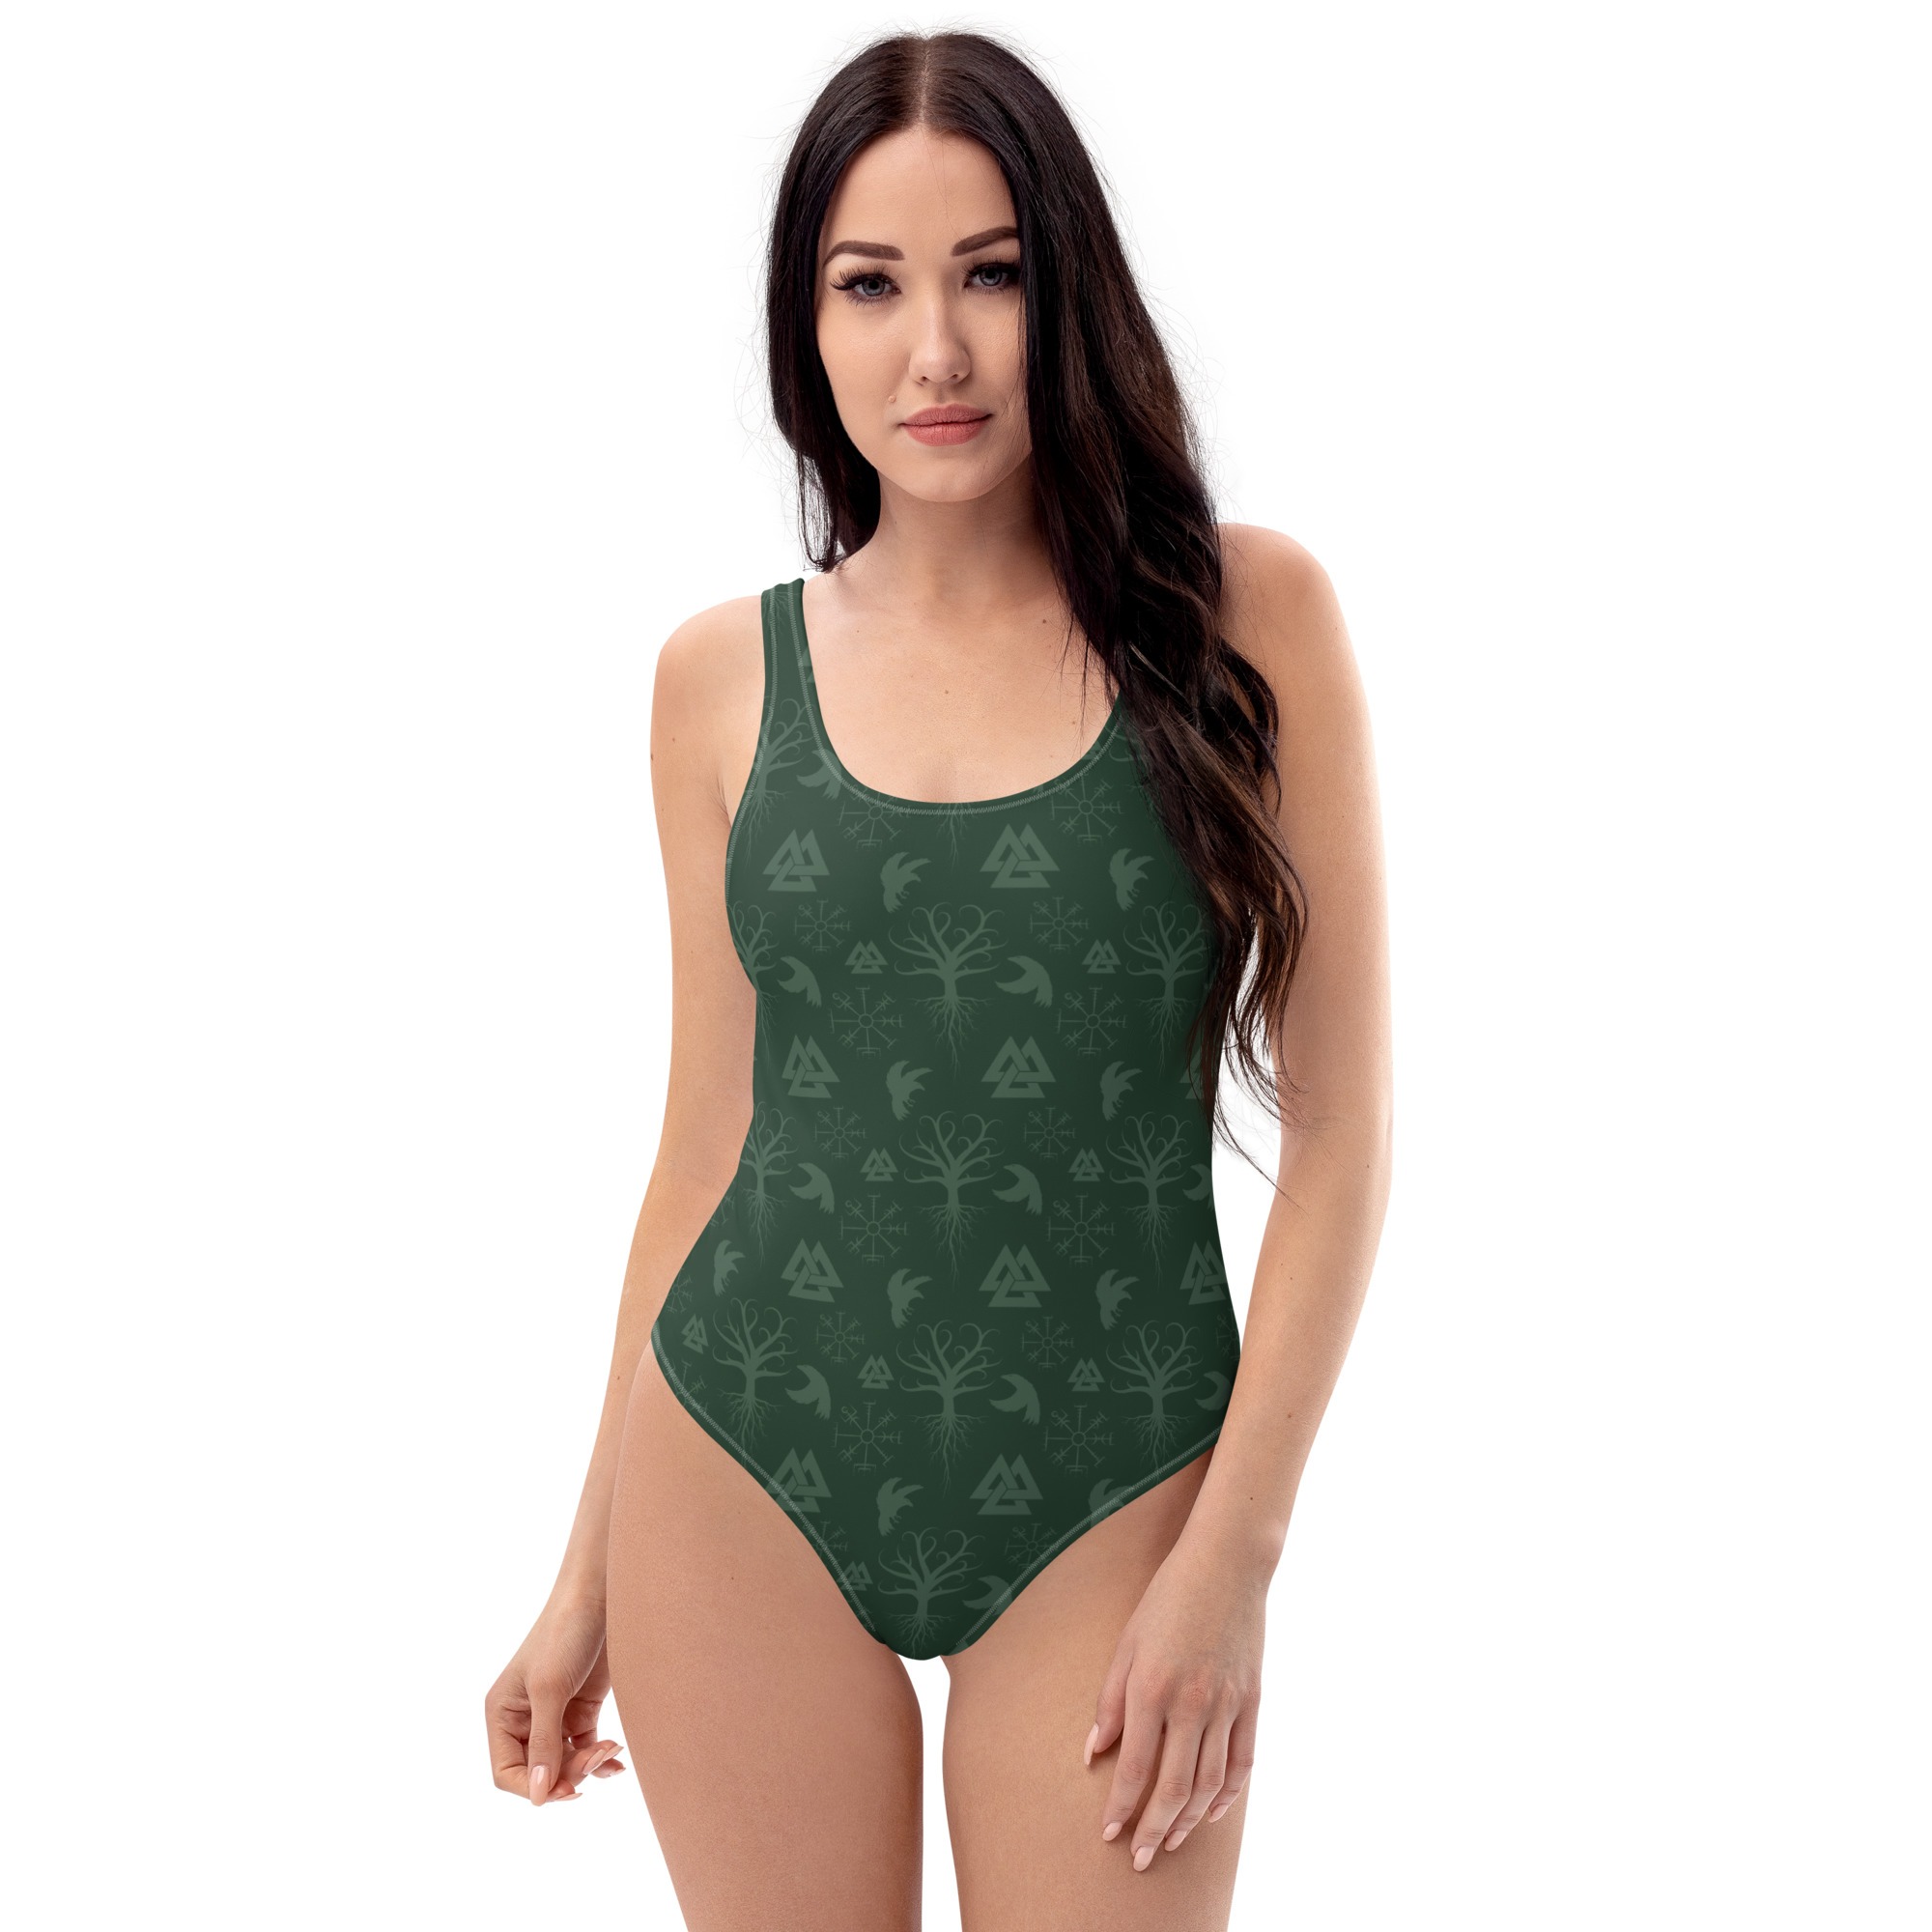 Green Norse Symbols One-Piece Swimsuit